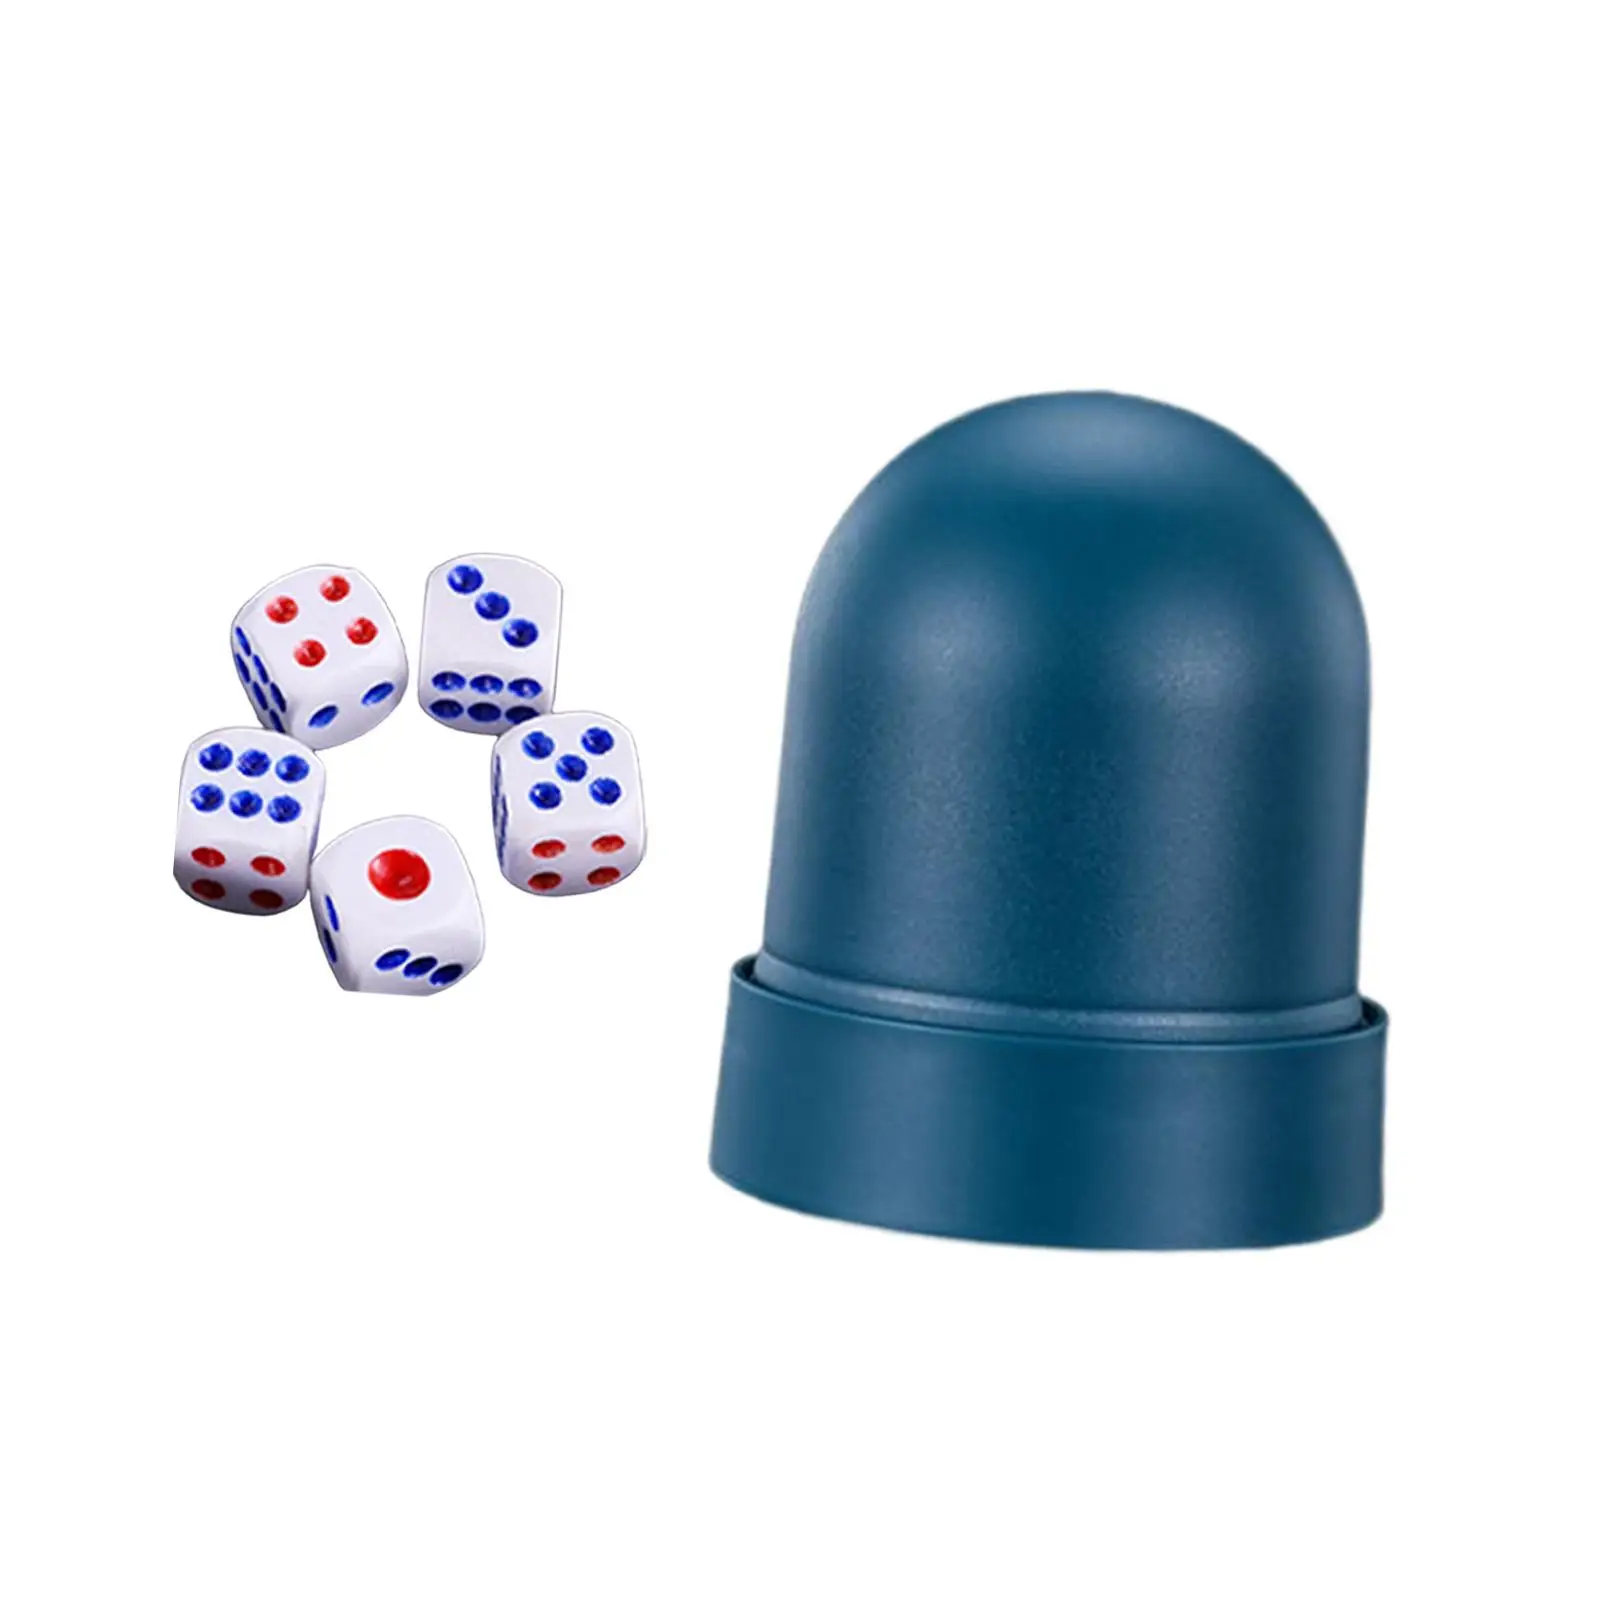 Dice Cup Upgraded Press dices game Space Saving with 5 Dice Bar Dice for Bar Party